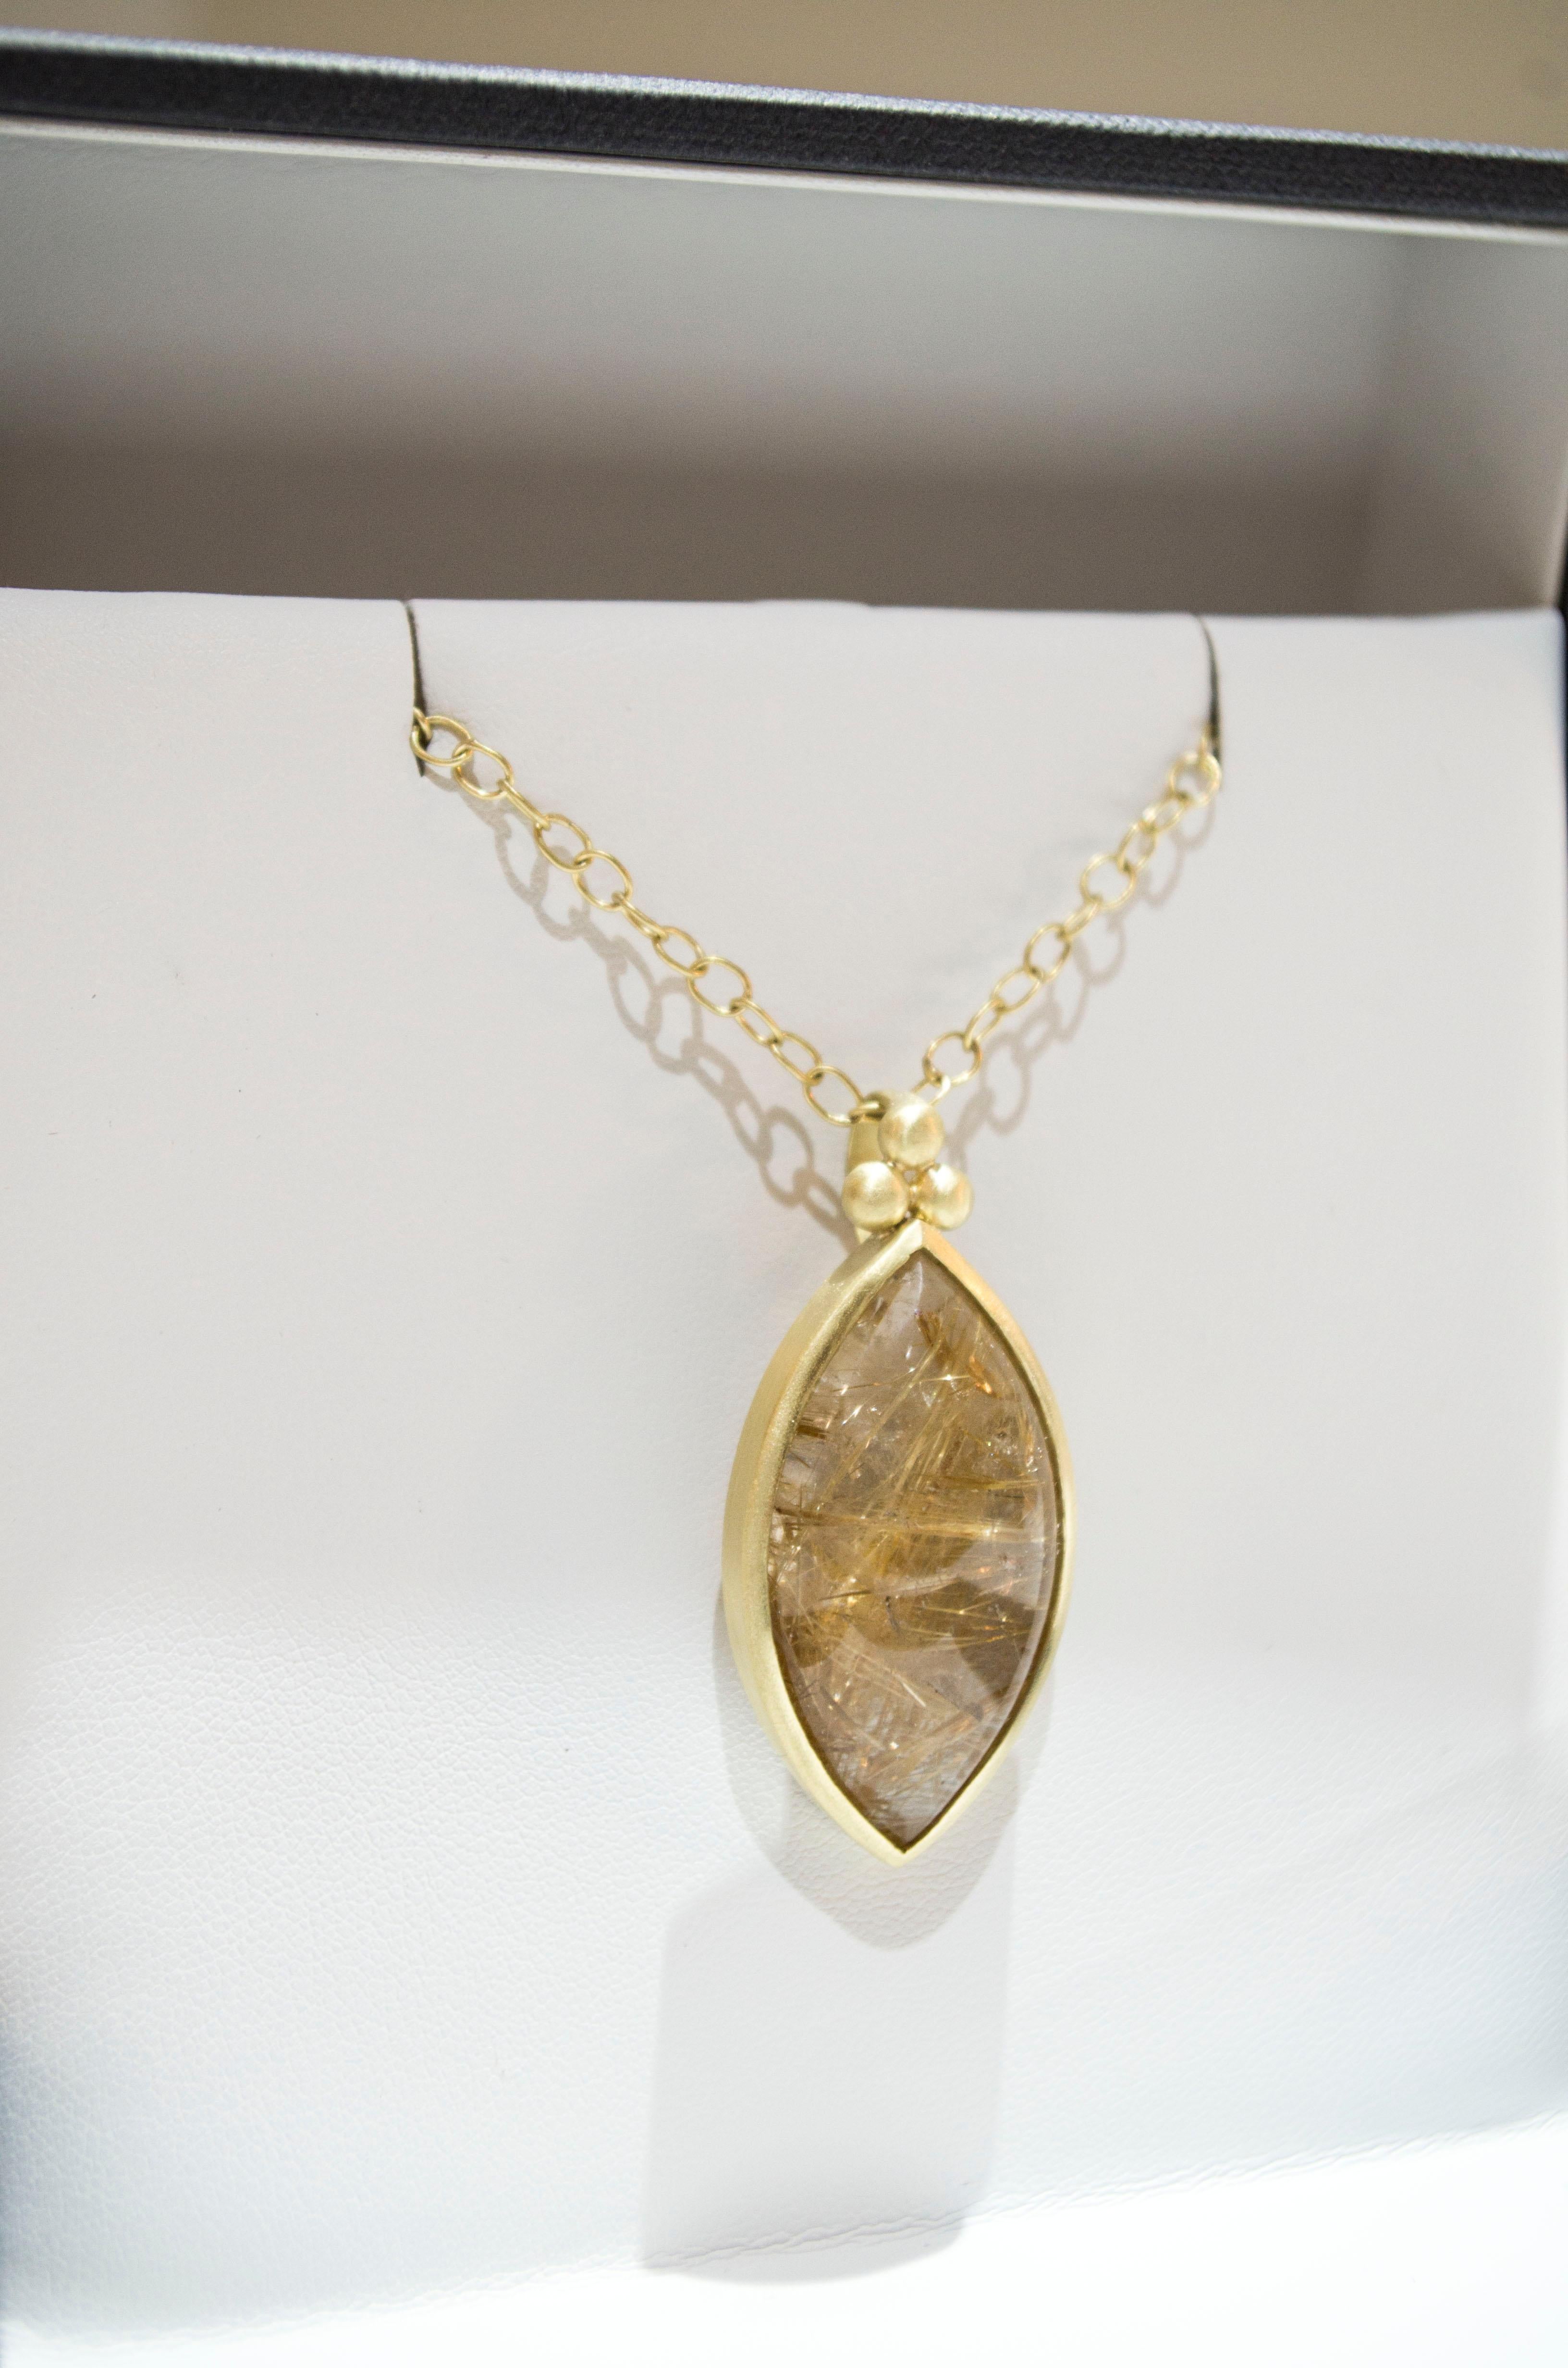 Unique and One of a Kind Rutilated Quartz Pendant on Medium Oval Link Chain. 
Handcrafted in 18k gold with triple granulation bead detail, the oversized Marquise shape and the natural inclusions of the rutile needles are enhanced by the matte gold